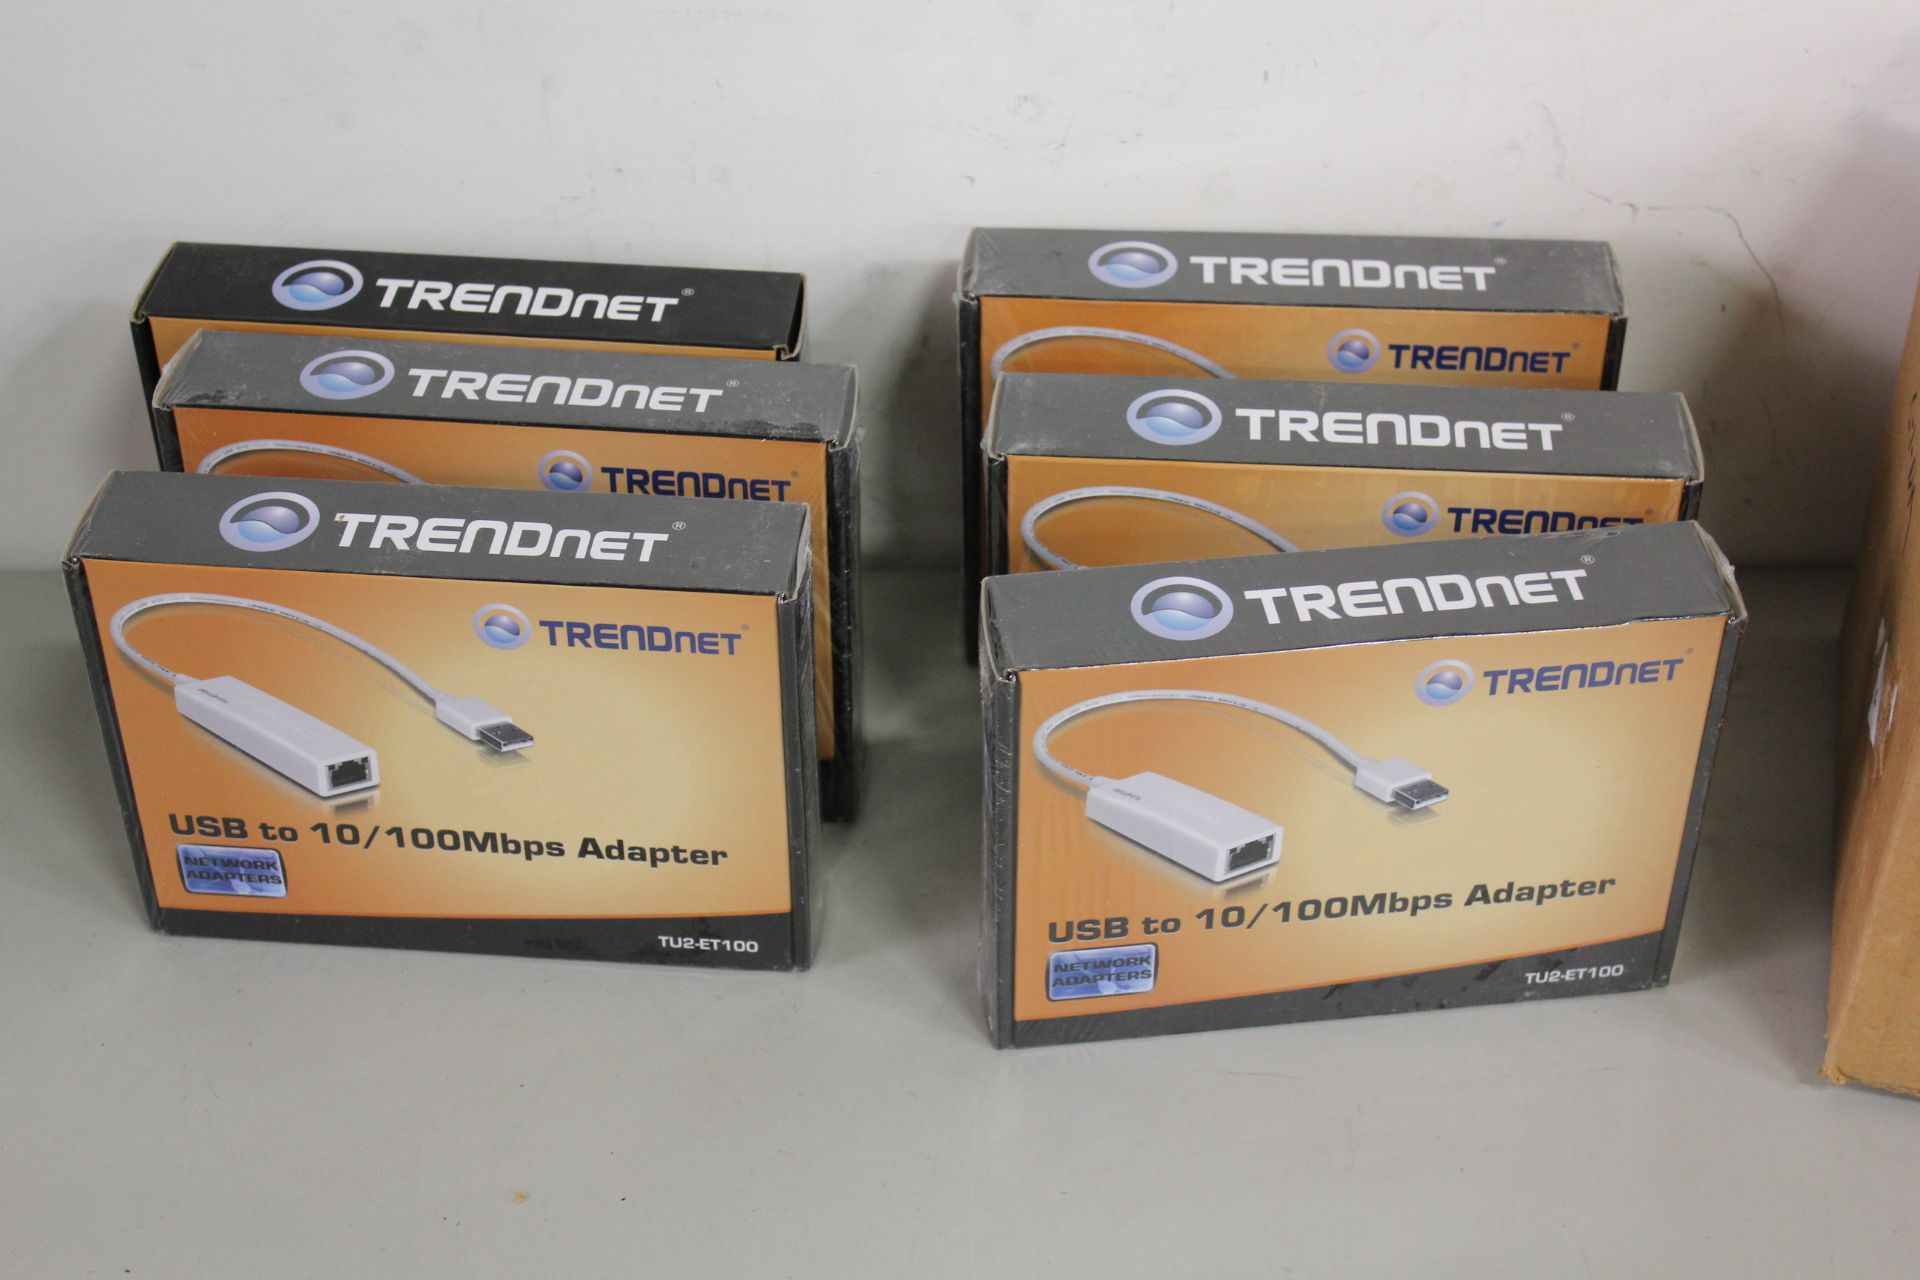 6 New Trendnet USB To 10/100Mbps Adapters - Image 2 of 3